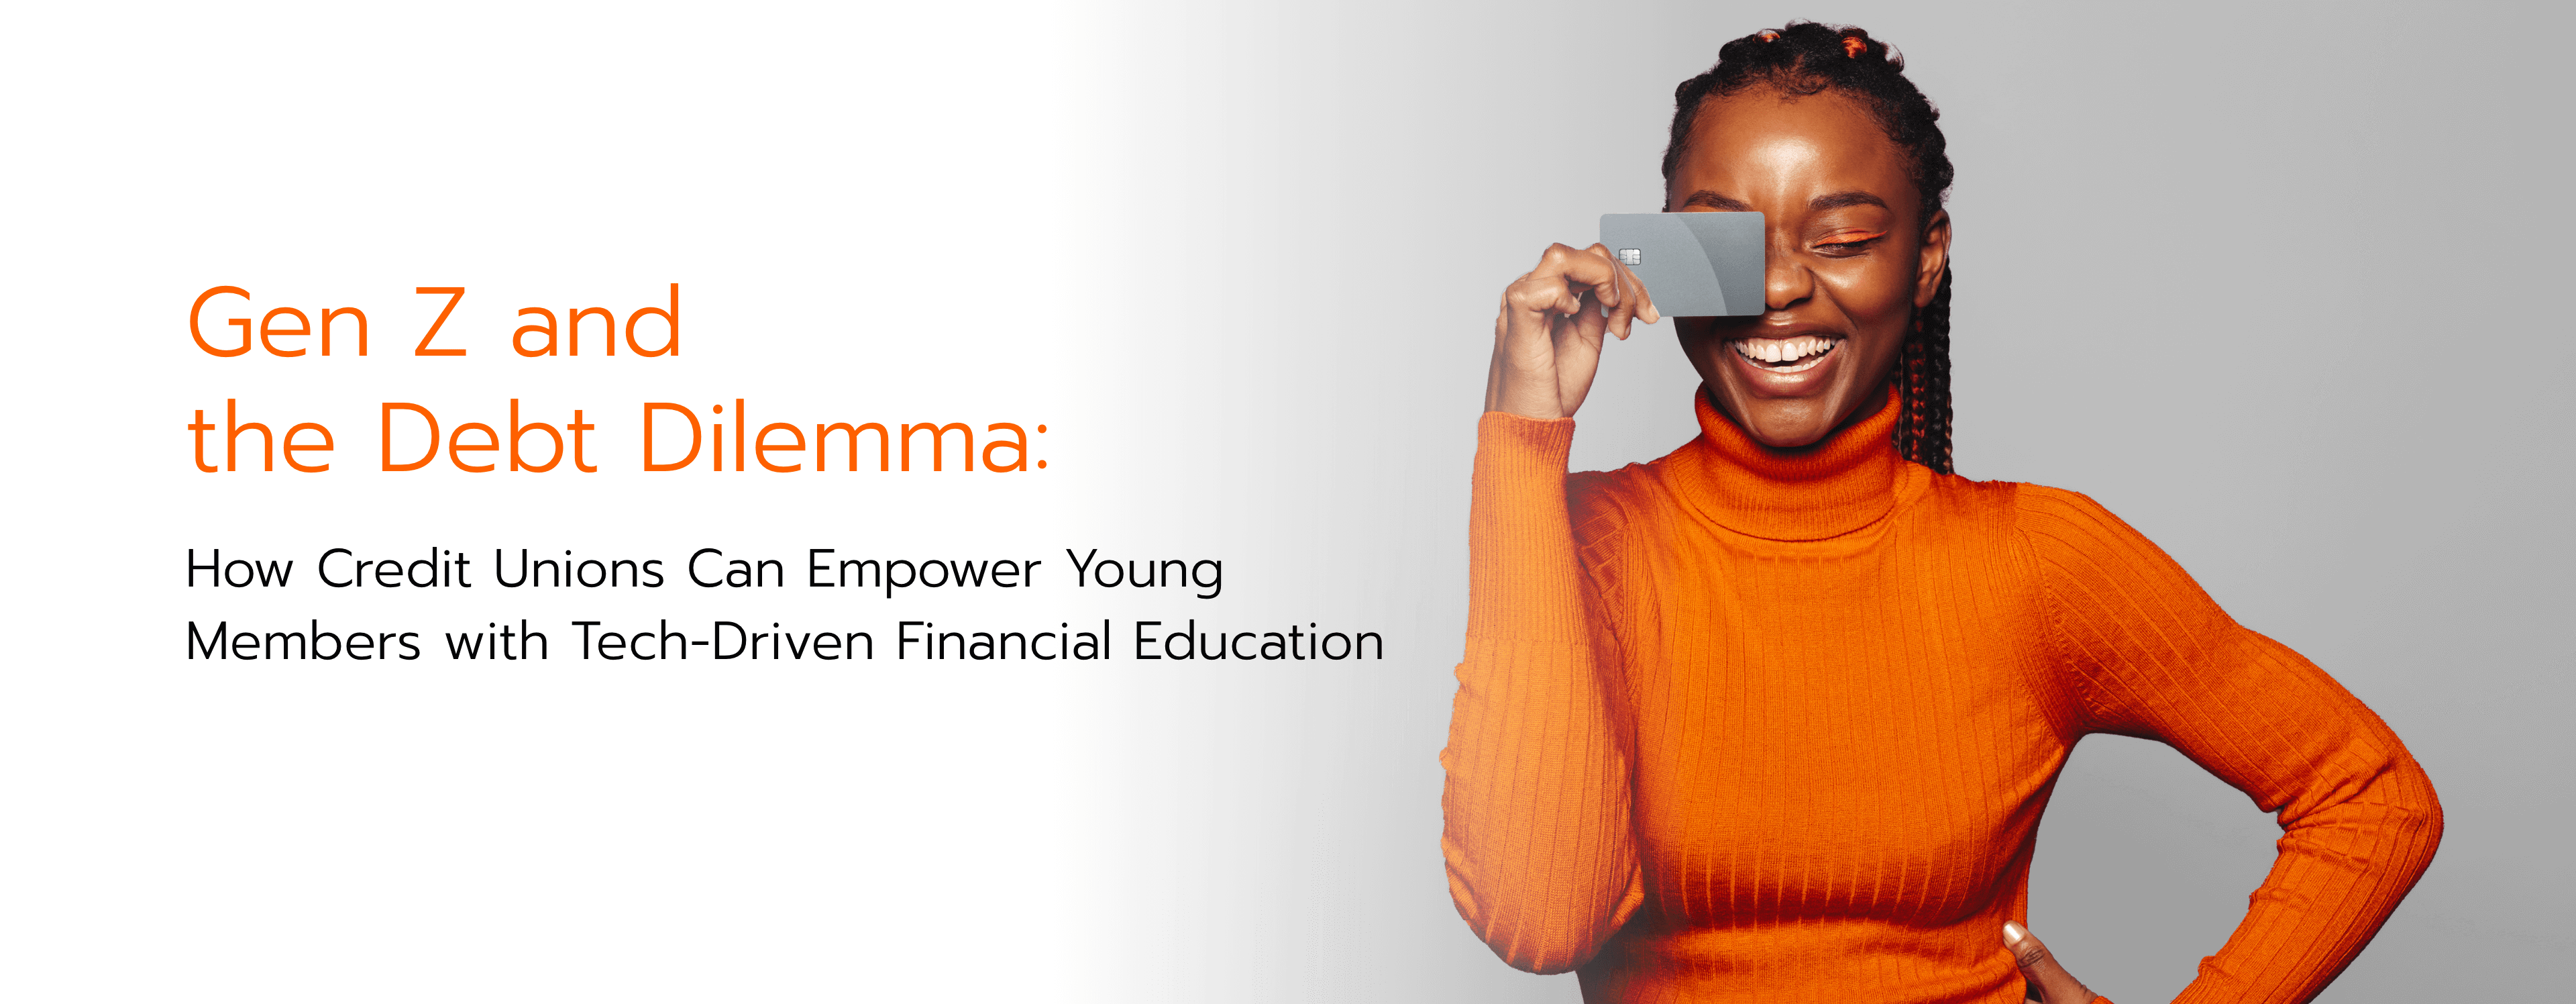 Gen Z and the Debt Dilemma: How Members with Tech-Driven Financial Education